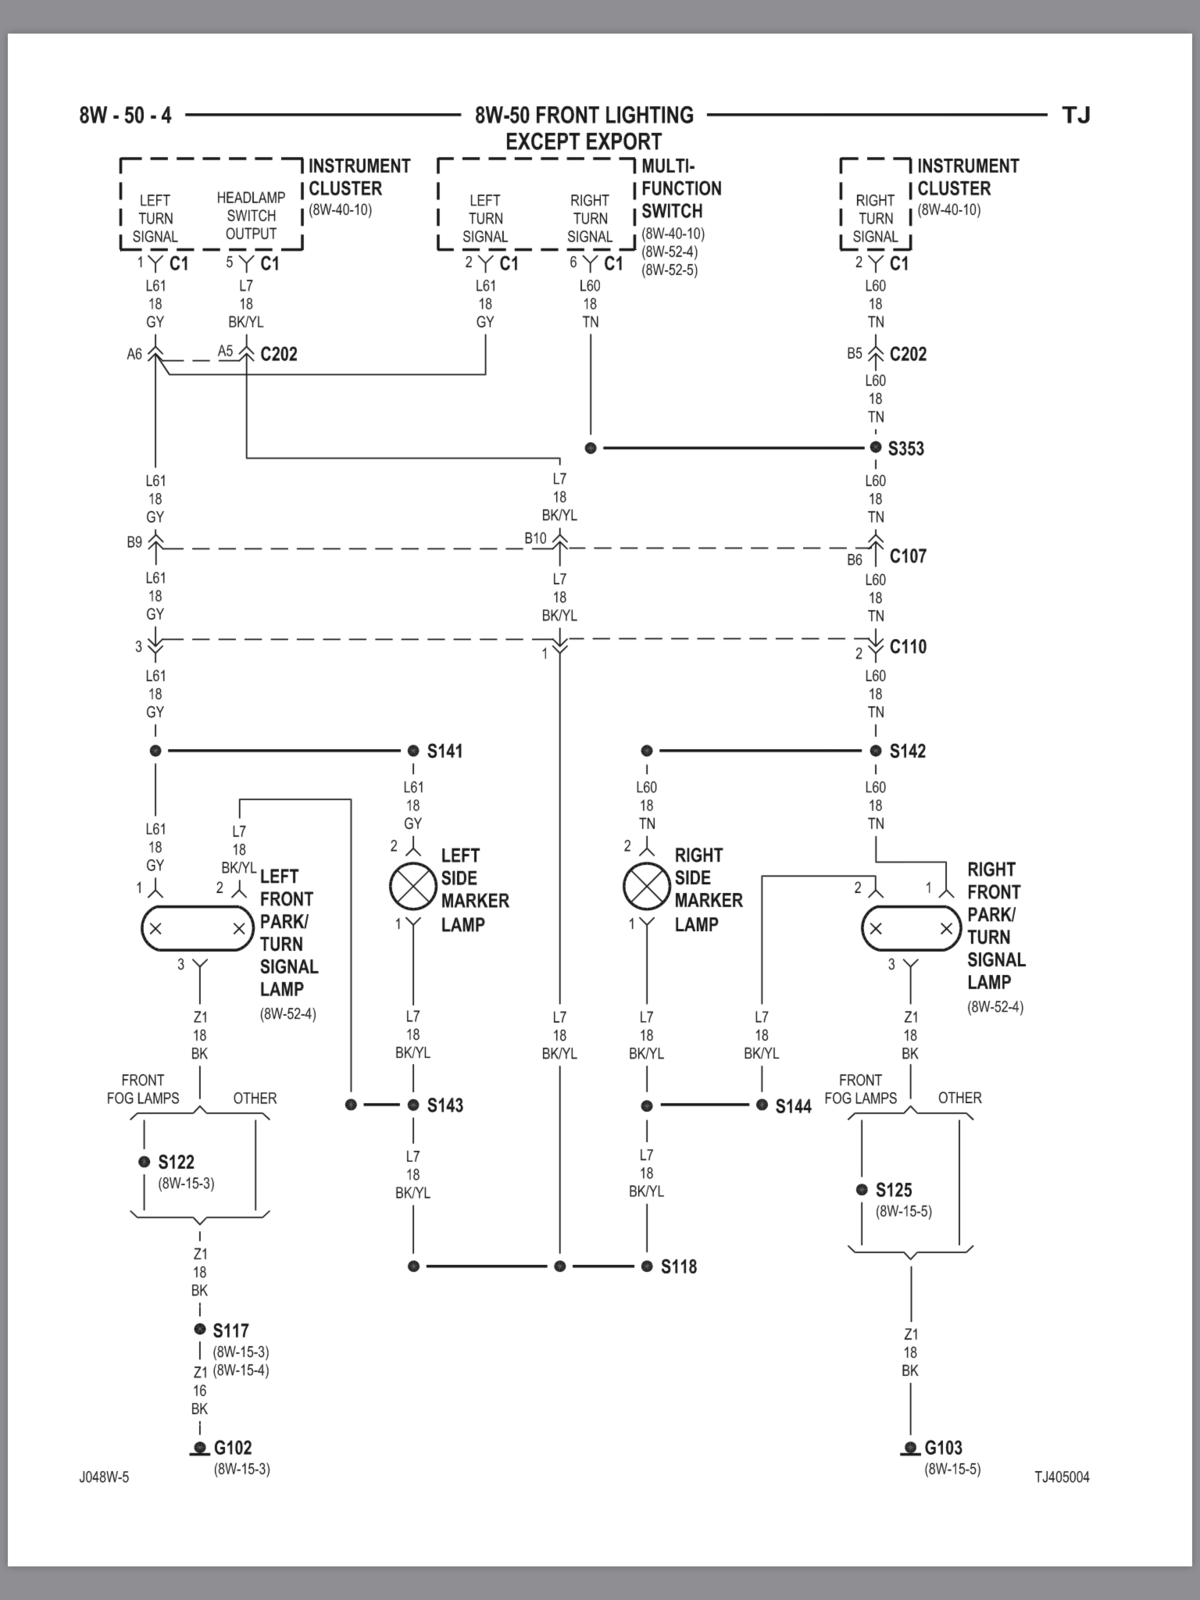 Wiring Guide or Diagram | Jeep Wrangler TJ Forum 97 Jeep Wrangler Wiring Diagram Jeep Wrangler TJ Forum